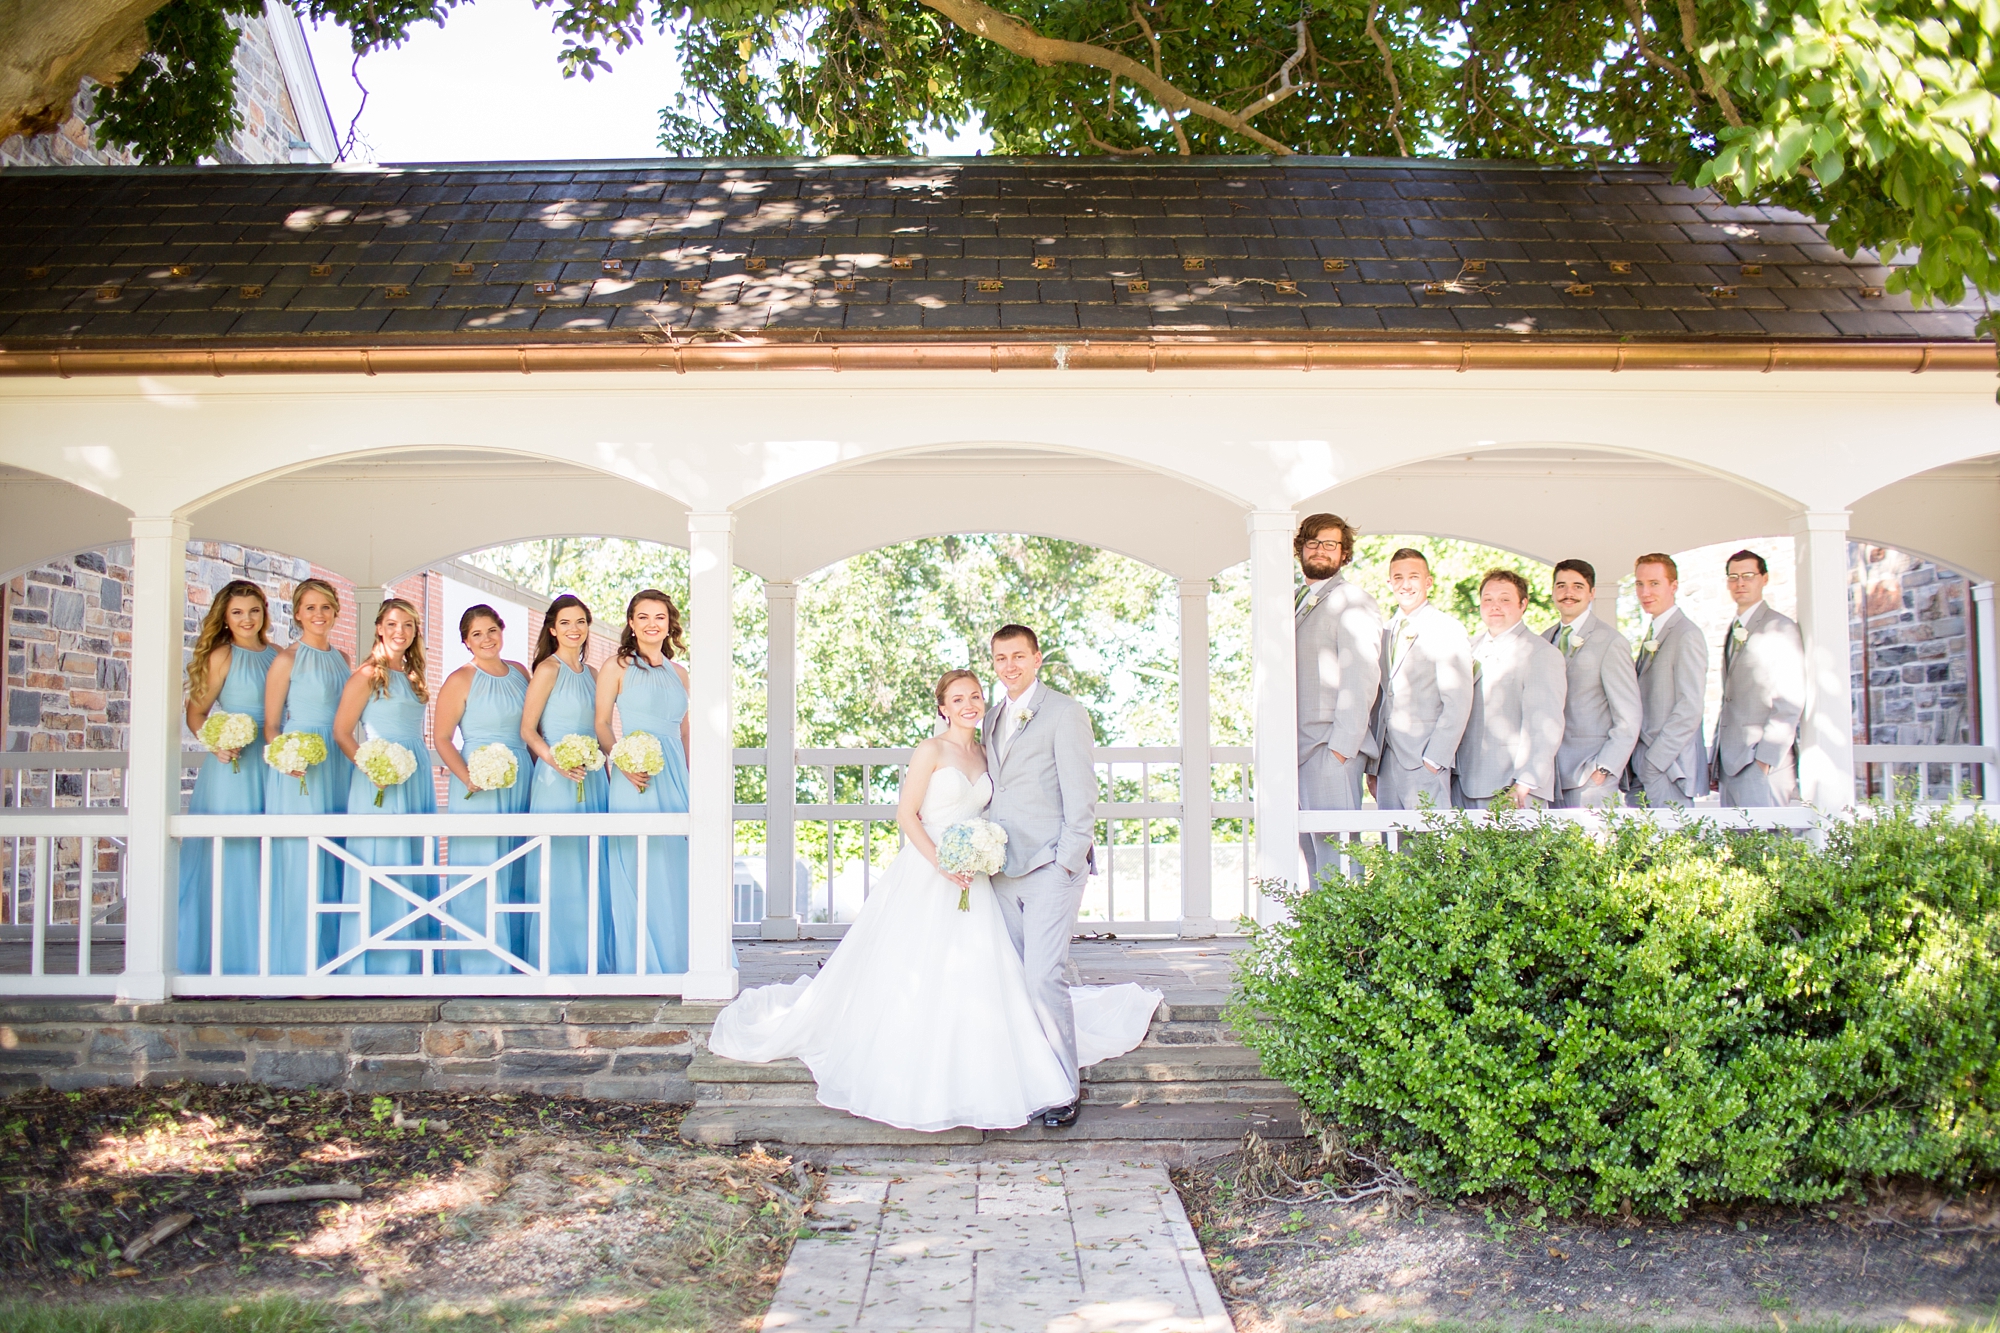 Mroz 2-Bridal Party-533_anna grace photography top of the bay maryland wedding photographer photo.jpg